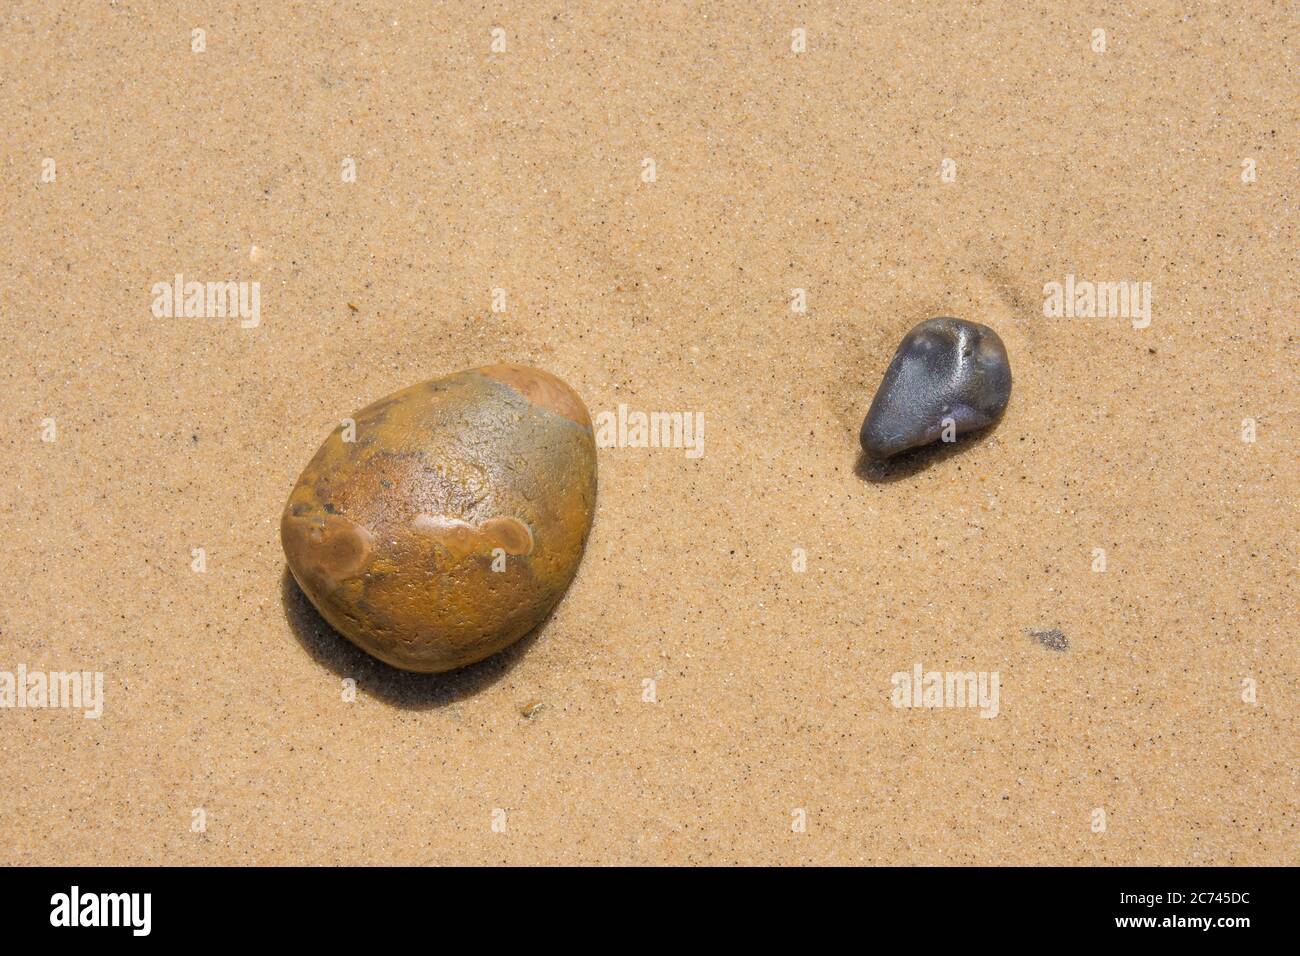 A group of pebbles pebbles resting on a background of flat water washed sand Stock Photo